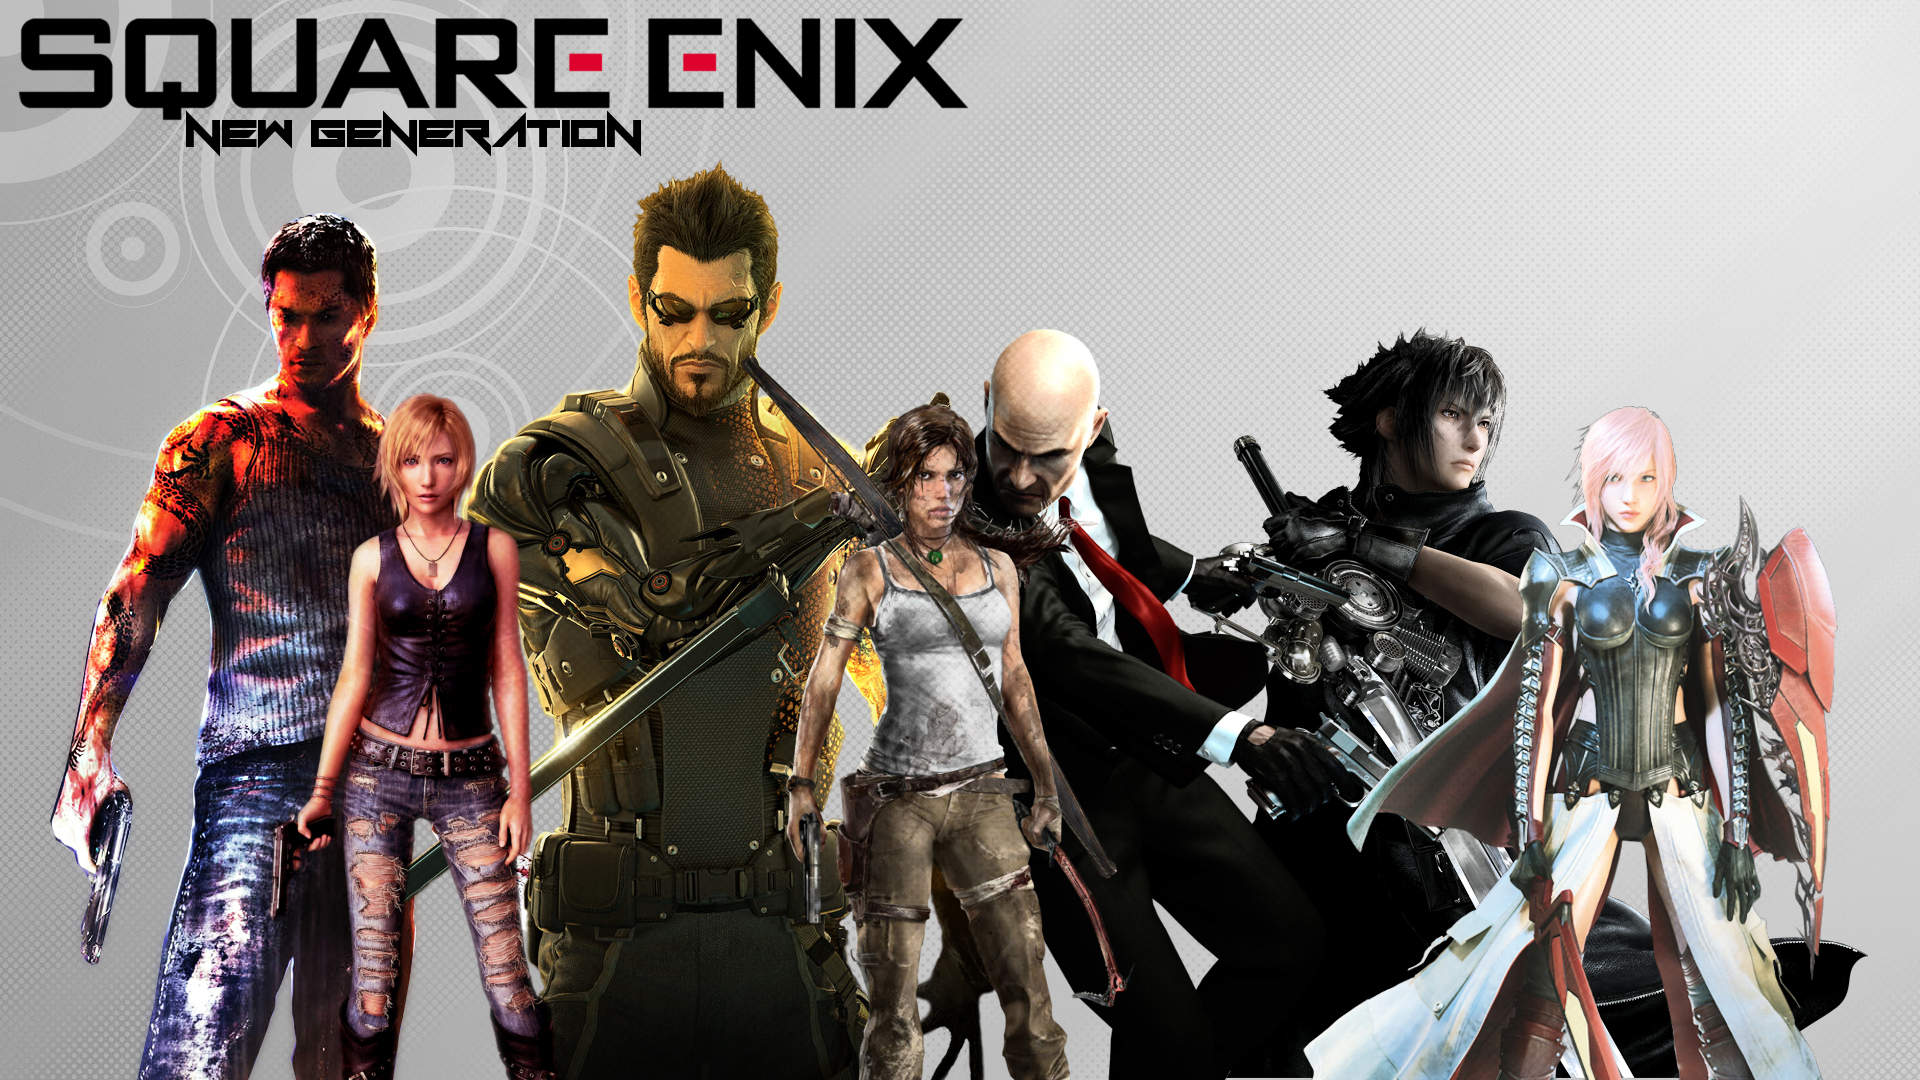 10 Best Square Enix Games Ranked - KeenGamer